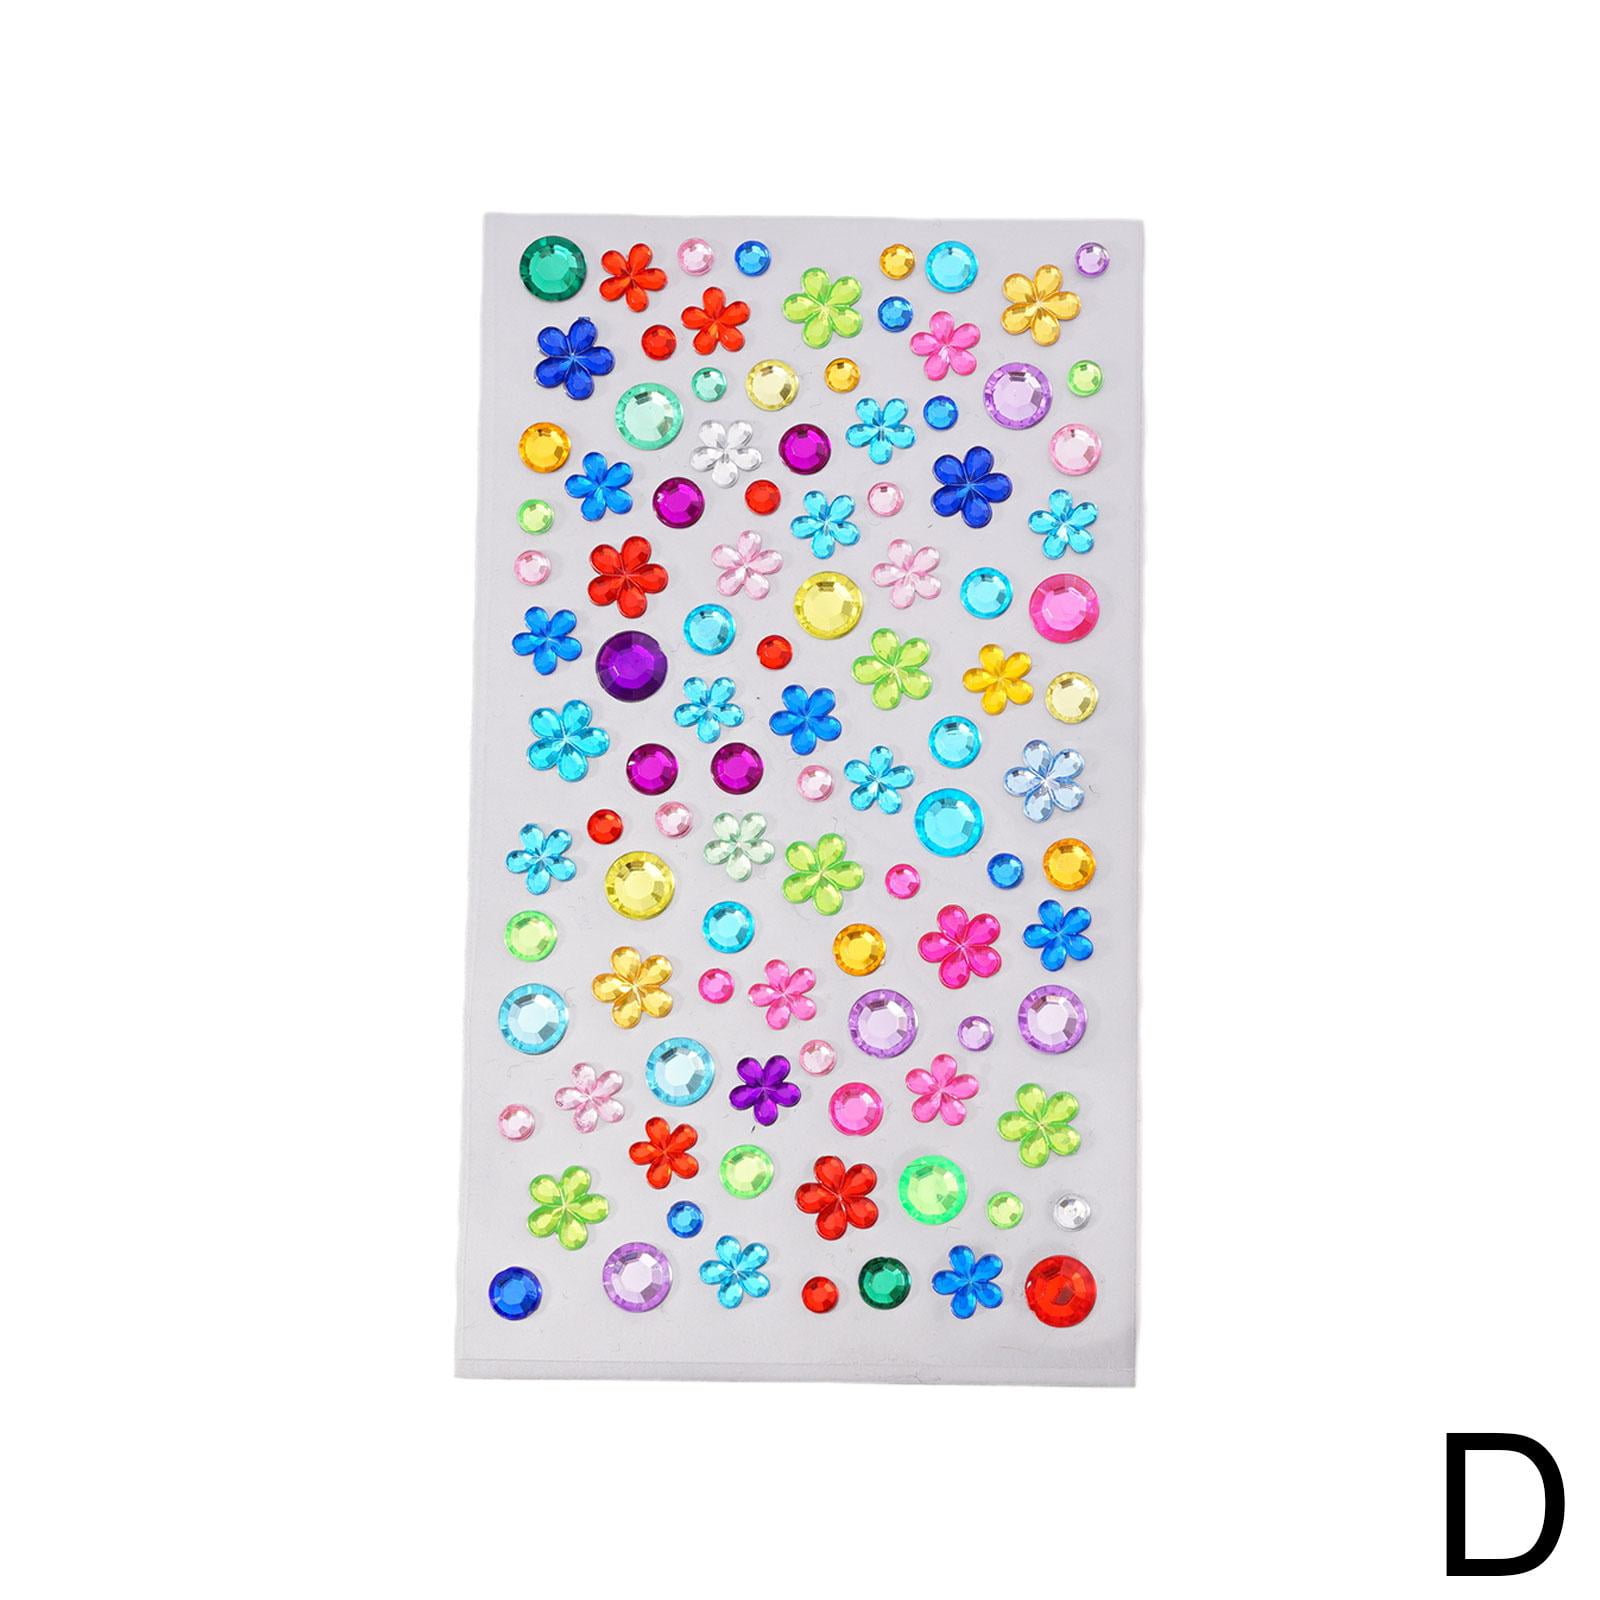 DECORA 325 Clear Rhinestone Stickers Gems and Self Adhesive Craft Bling